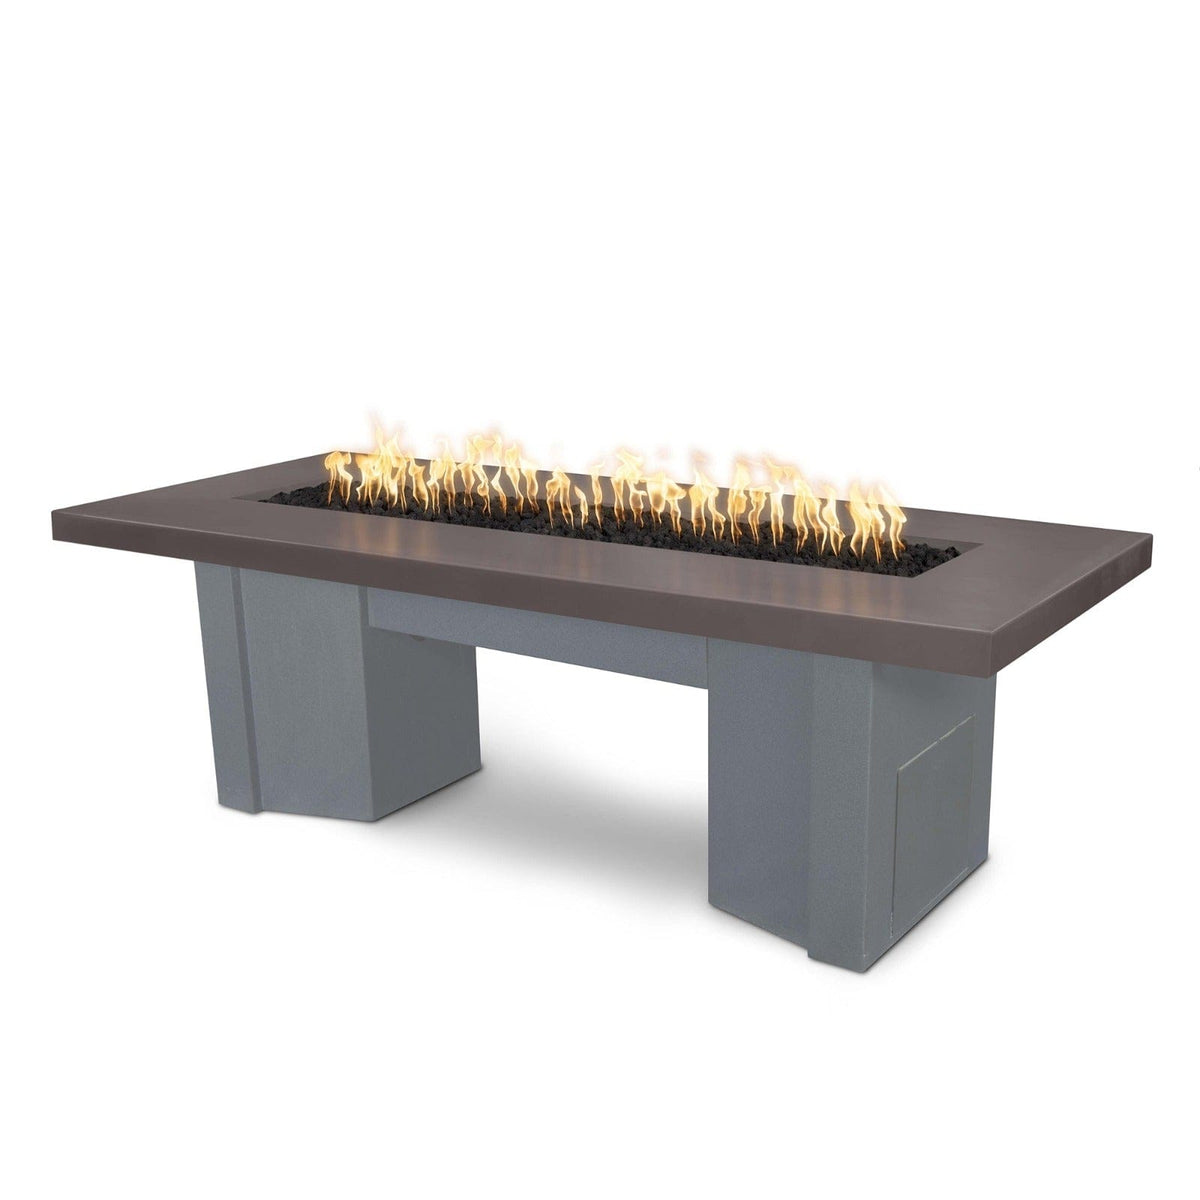 The Outdoor Plus Fire Features Chestnut (-CST) / Gray Powder Coated Steel (-GRY) The Outdoor Plus 60&quot; Alameda Fire Table Smooth Concrete in Liquid Propane - 110V Plug &amp; Play Electronic Ignition / OPT-ALMGFRC60EKIT-LP